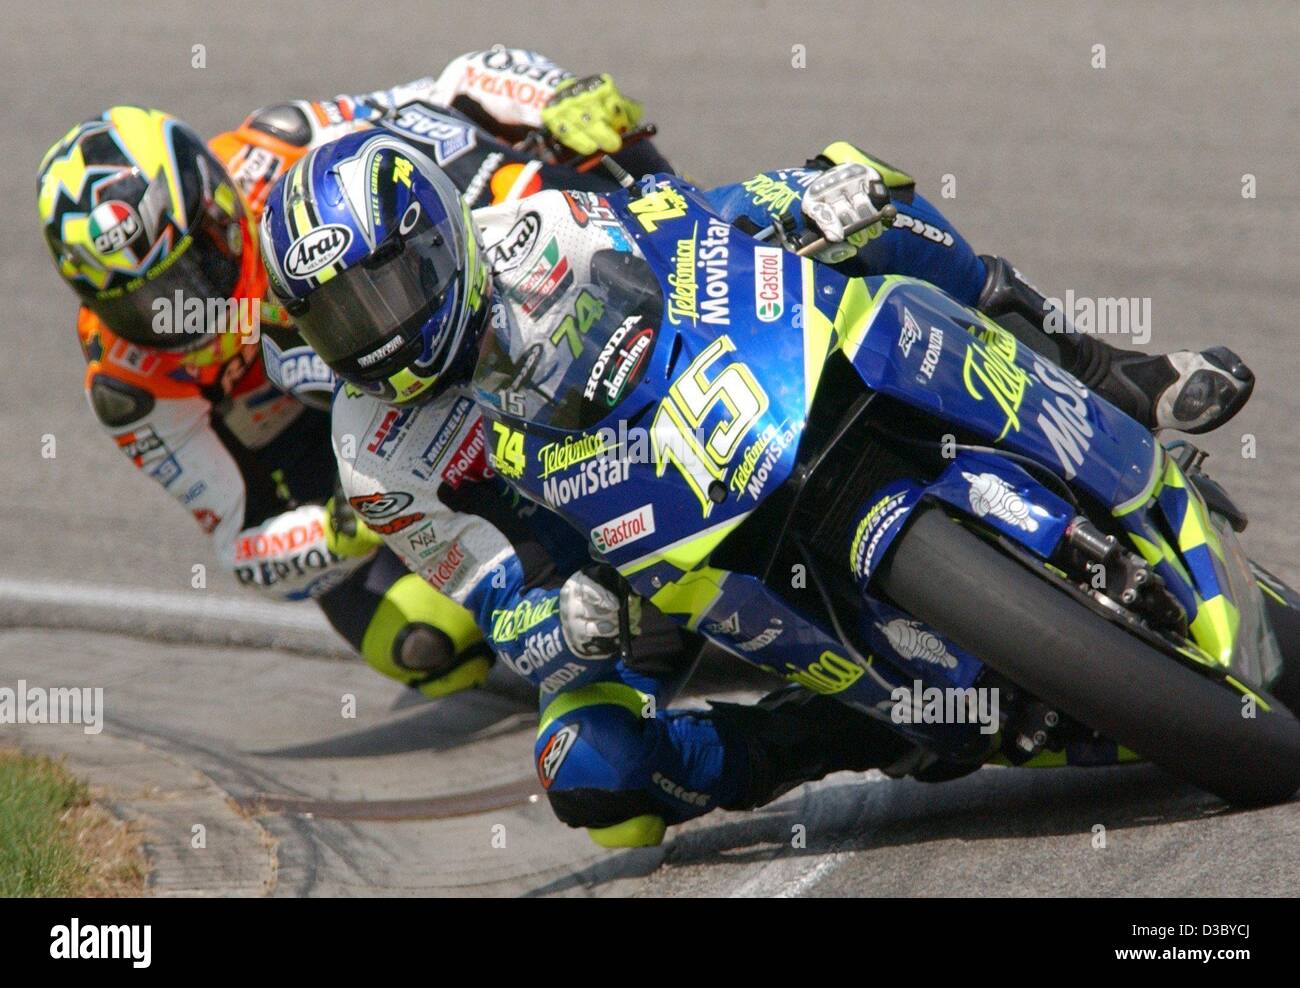 (dpa) - Spanish motorcycle pilot Sete Gibernau (front, Honda) races through a curve followed by Italian title defender Valentino Rossi (Honda) during the MotoGP race of the German Grand Prix on the Sachsenring near Hohenstein-Ernstthal, Germany, 27 July 2003. Gibernau wins first place. Stock Photo